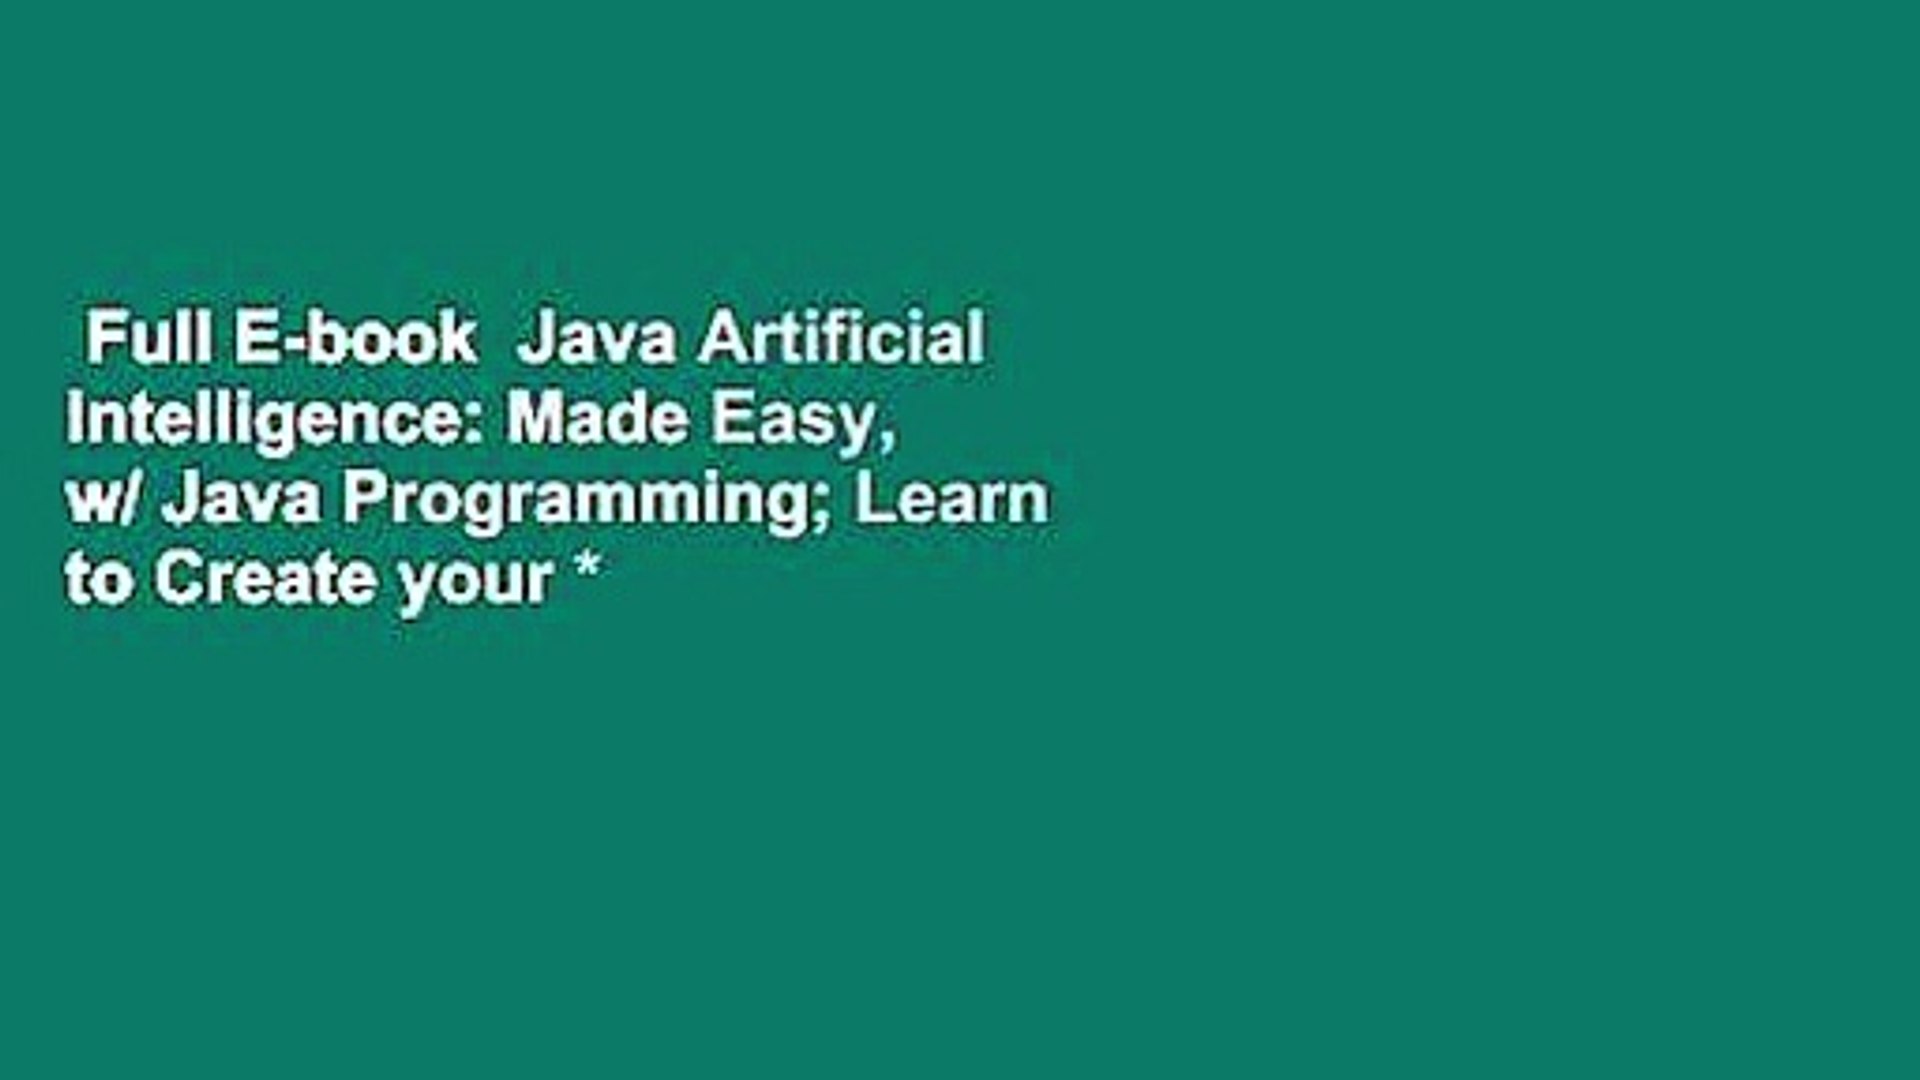 Full E-book  Java Artificial Intelligence: Made Easy, w/ Java Programming; Learn to Create your *